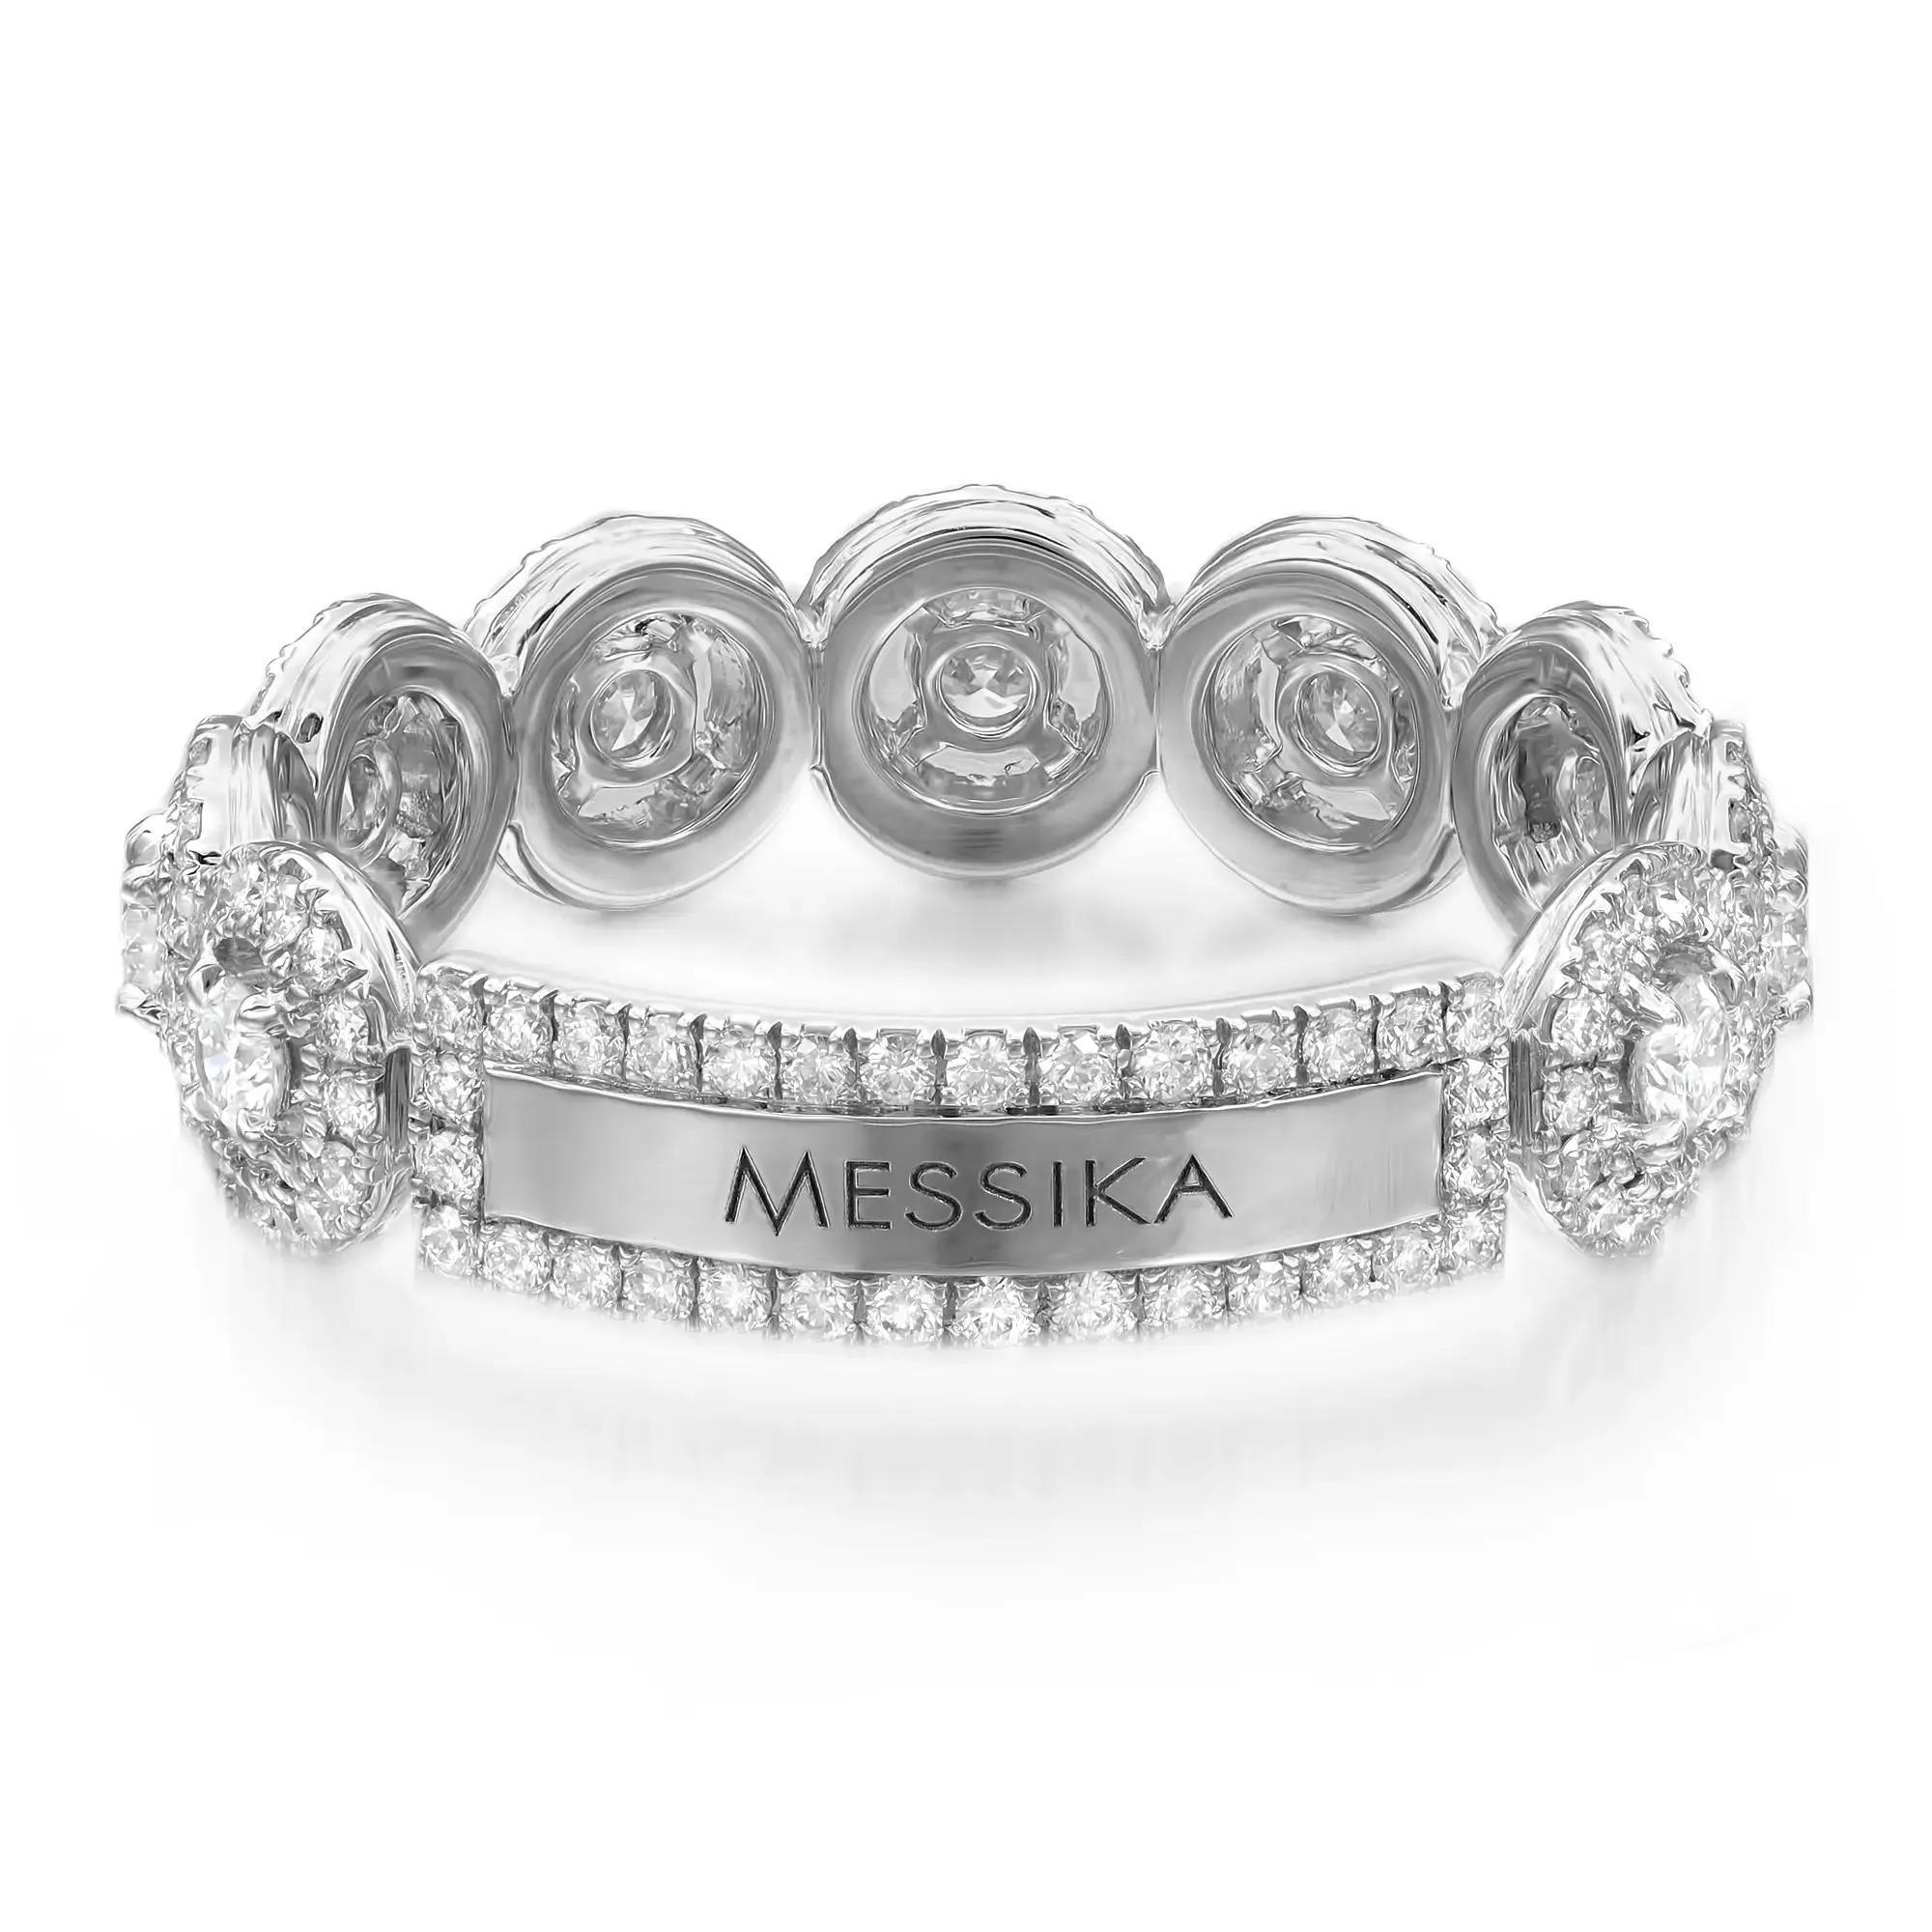 Walk with grace with this sparkling Messika All Joy diamond ring. Crafted in 18K White Gold, it features prong set round brilliant cut diamonds in the center accented with diamond halo. Total diamond weight: 0.88 carat. Diamond quality: color G and